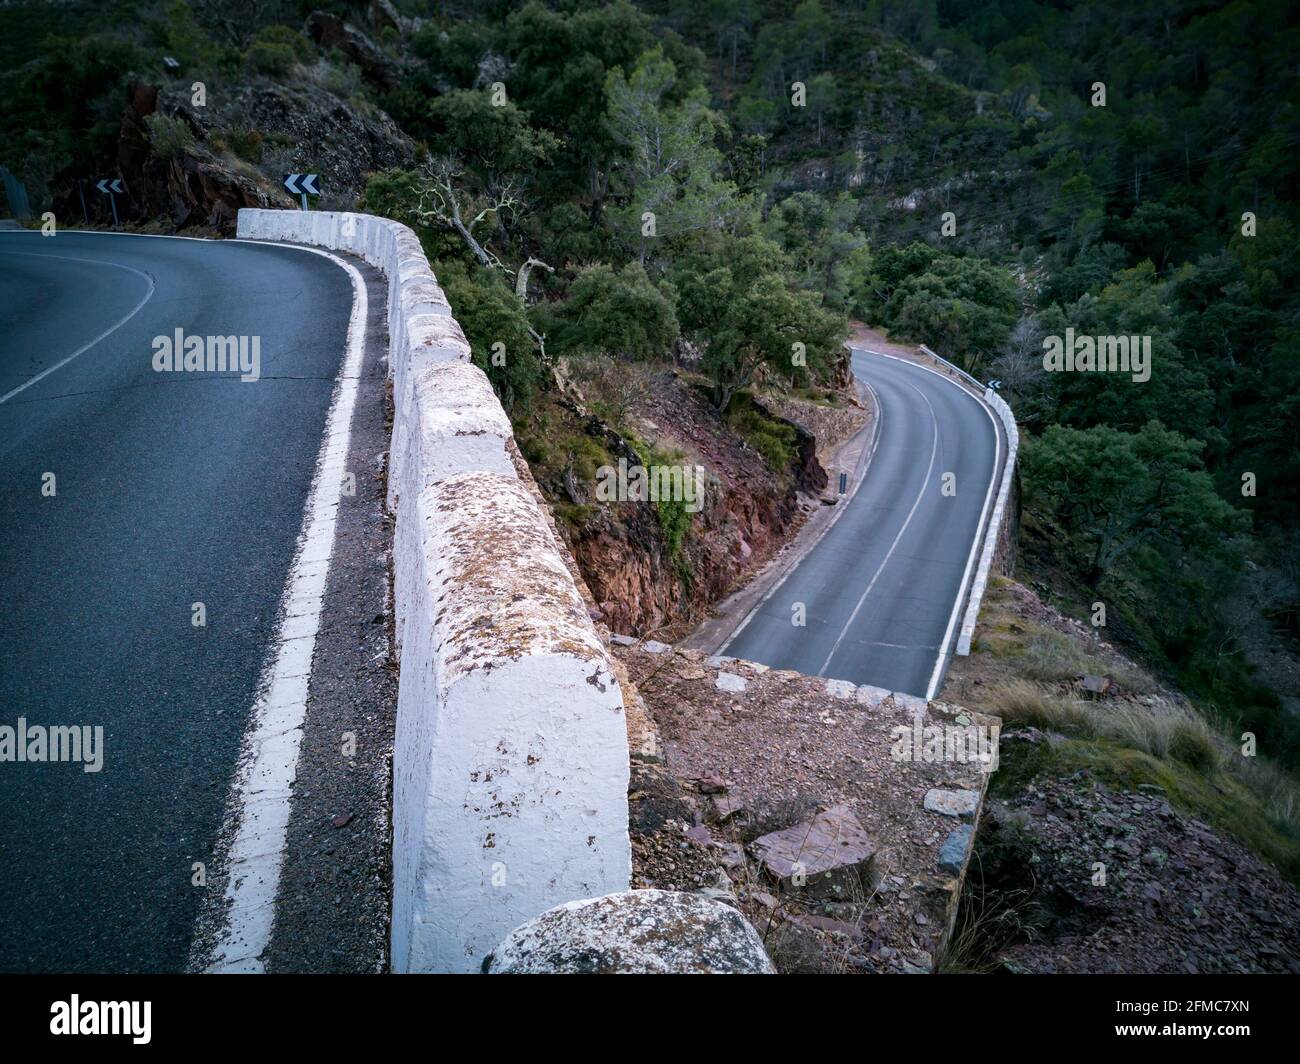 Mountain road at different levels with bollards Stock Photo